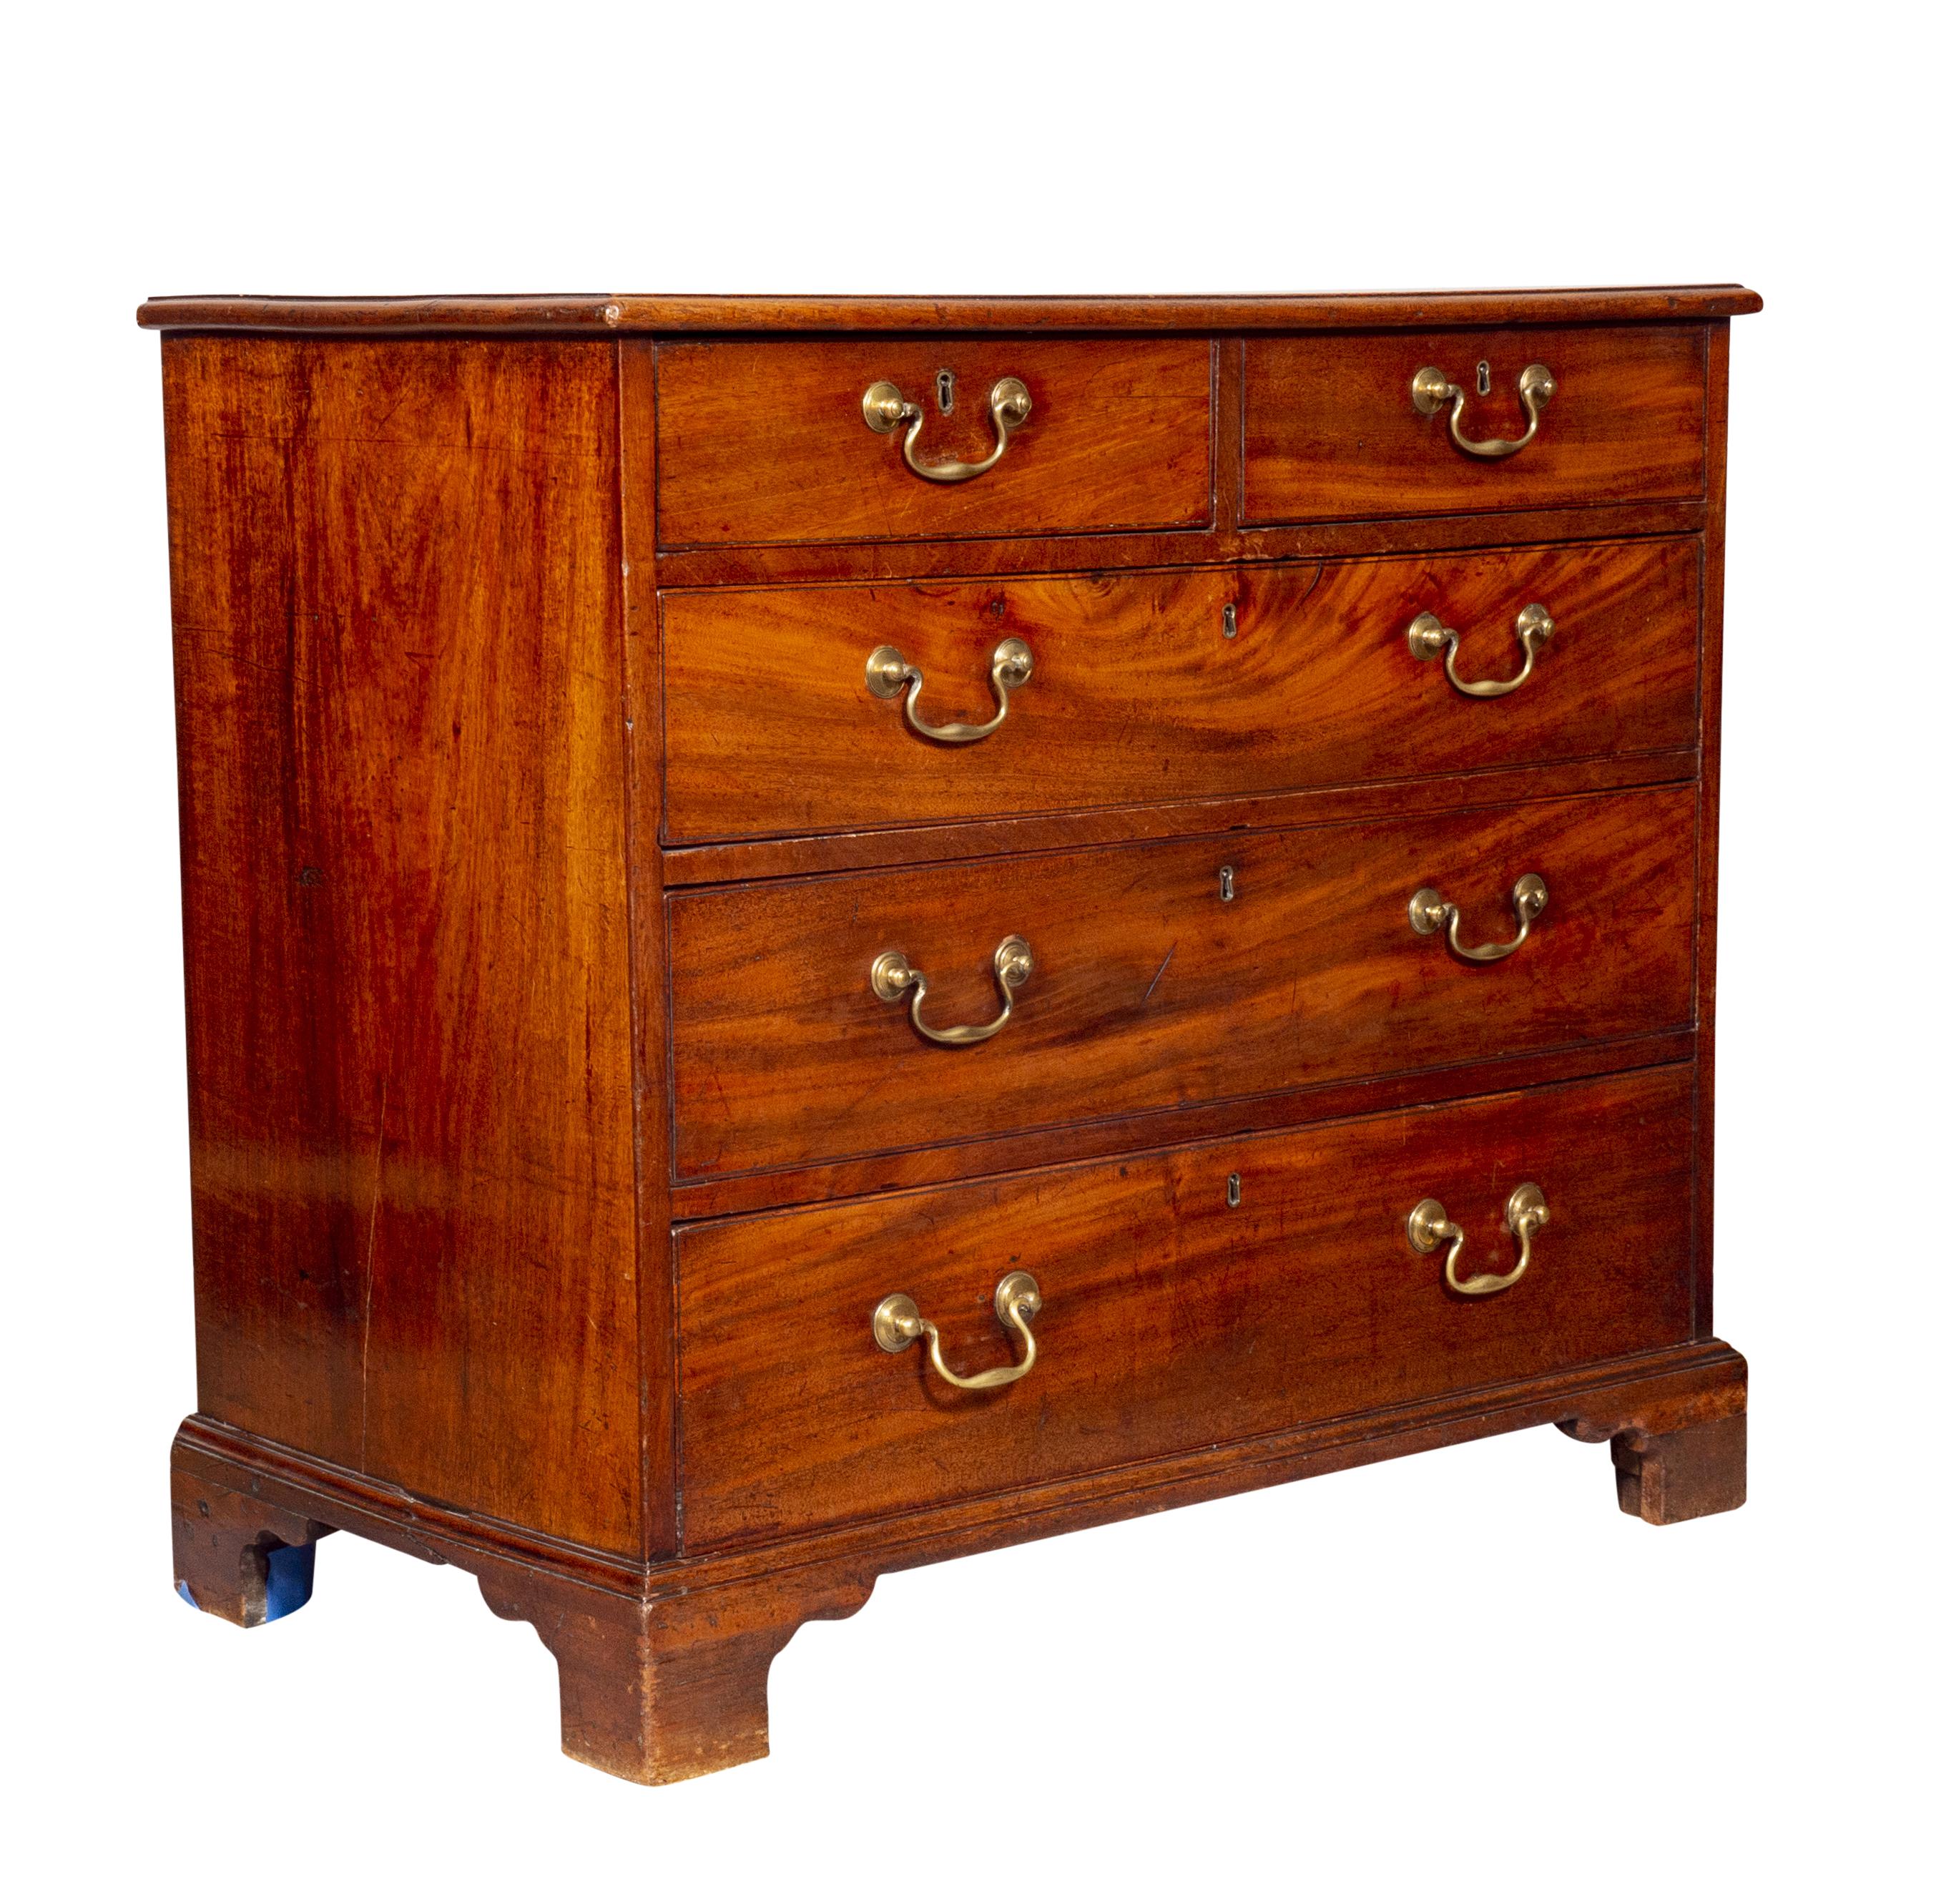 Late 18th Century George III Mahogany Chest Of Drawers